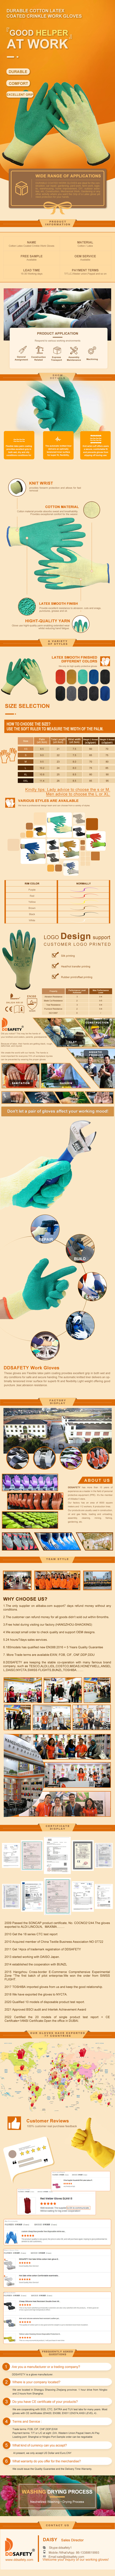 Green Latex Rubber Coated Crinkle Safety Work Gloves Luvas Guantes Ce 3232 - DKL324 Green Latex Rubber Coated Crinkle Safety Work Gloves Luvas Guantes Ce 3232 - DKL324 gloves,latex coated gloves,work gloves,latex Coated Safety Work Gloves,Crinkle Latex Work Gloves